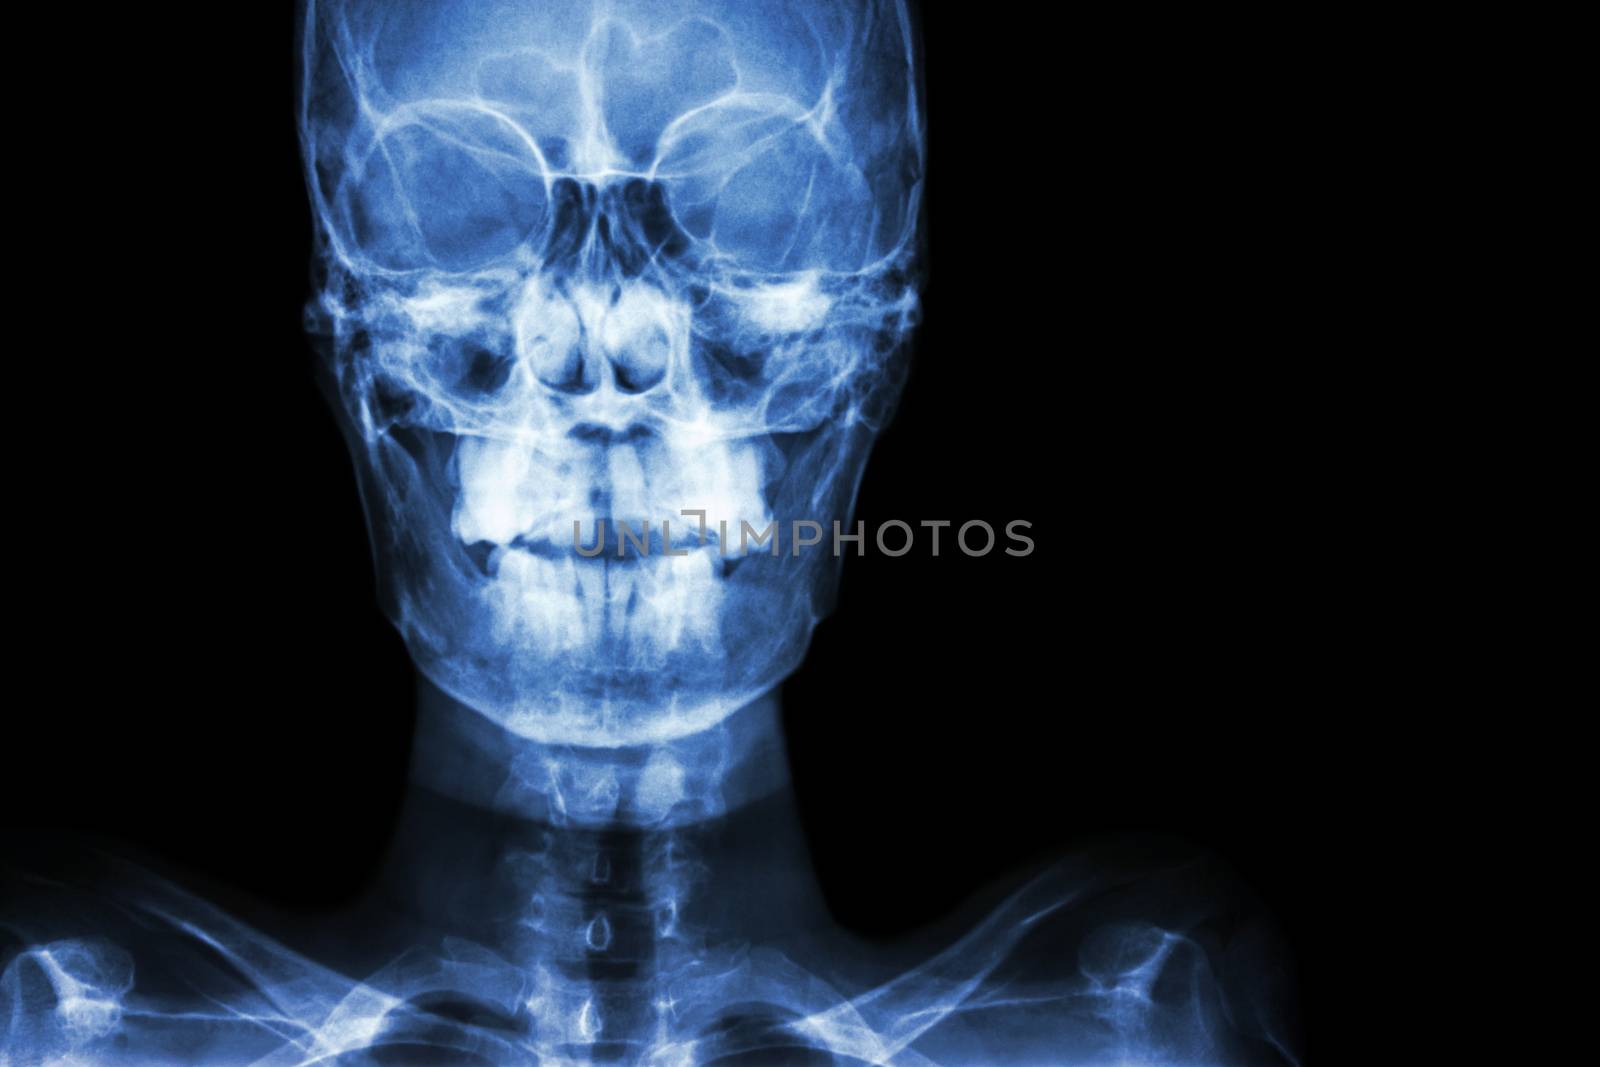 film x-ray Skull AP : show normal human's skull and blank area at right side